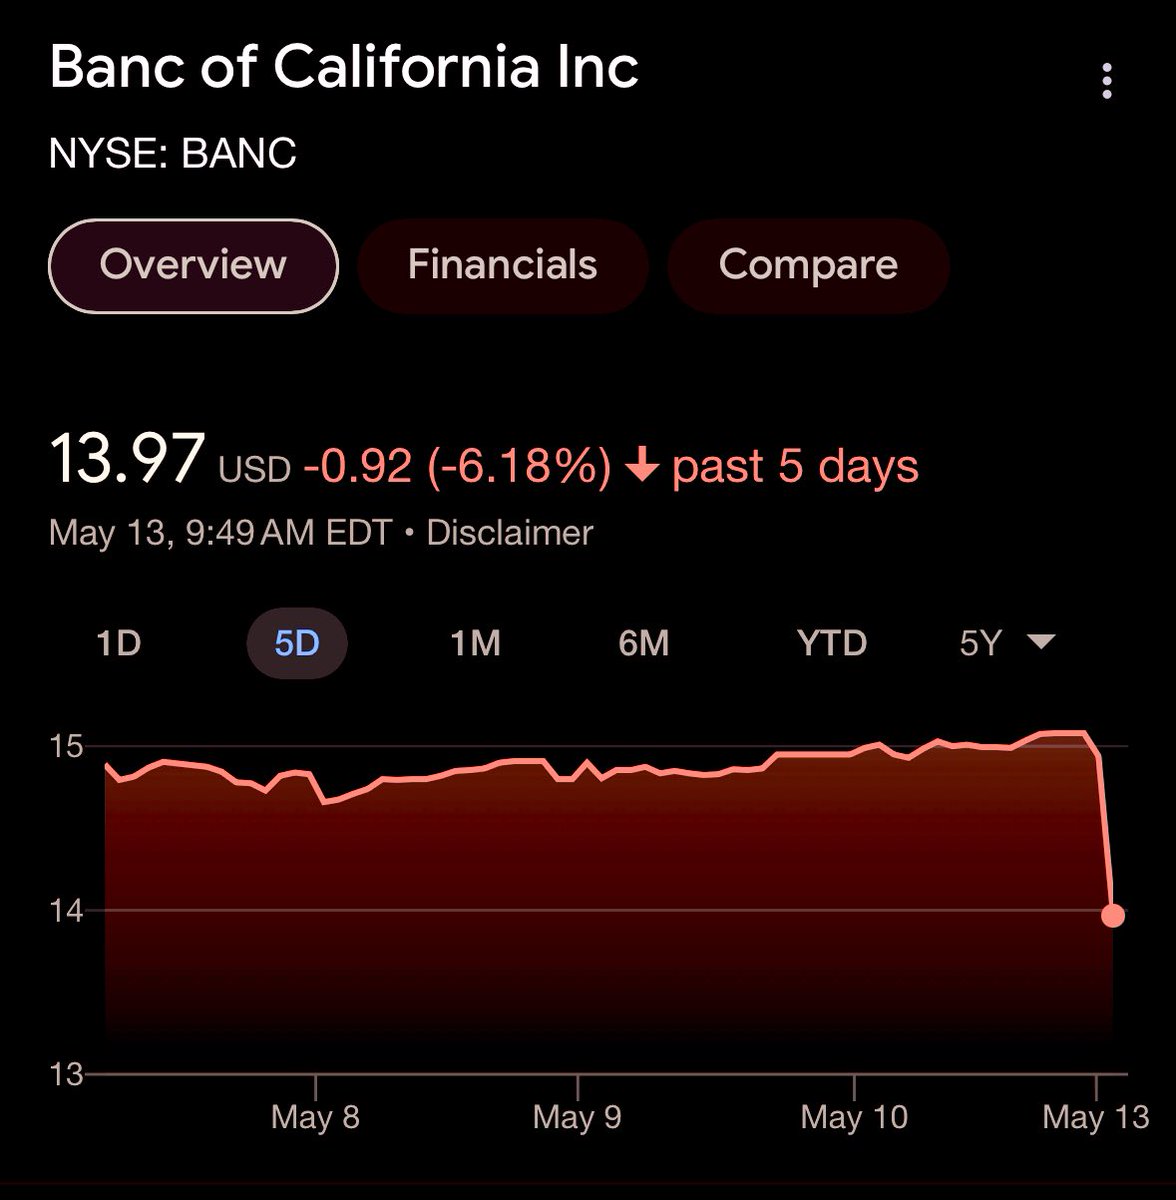 ⚠️Breaking News: Bank of California Stock Price Plummets by -7% 

- No Immediate news  for Sharp 📉
- Company Recently Missed EPS -22% 
- Banking stress continues 
- BANC is one of the largest banks in California  #BankOfCalifornia #StockMarket #FinanceNews 

$BANC